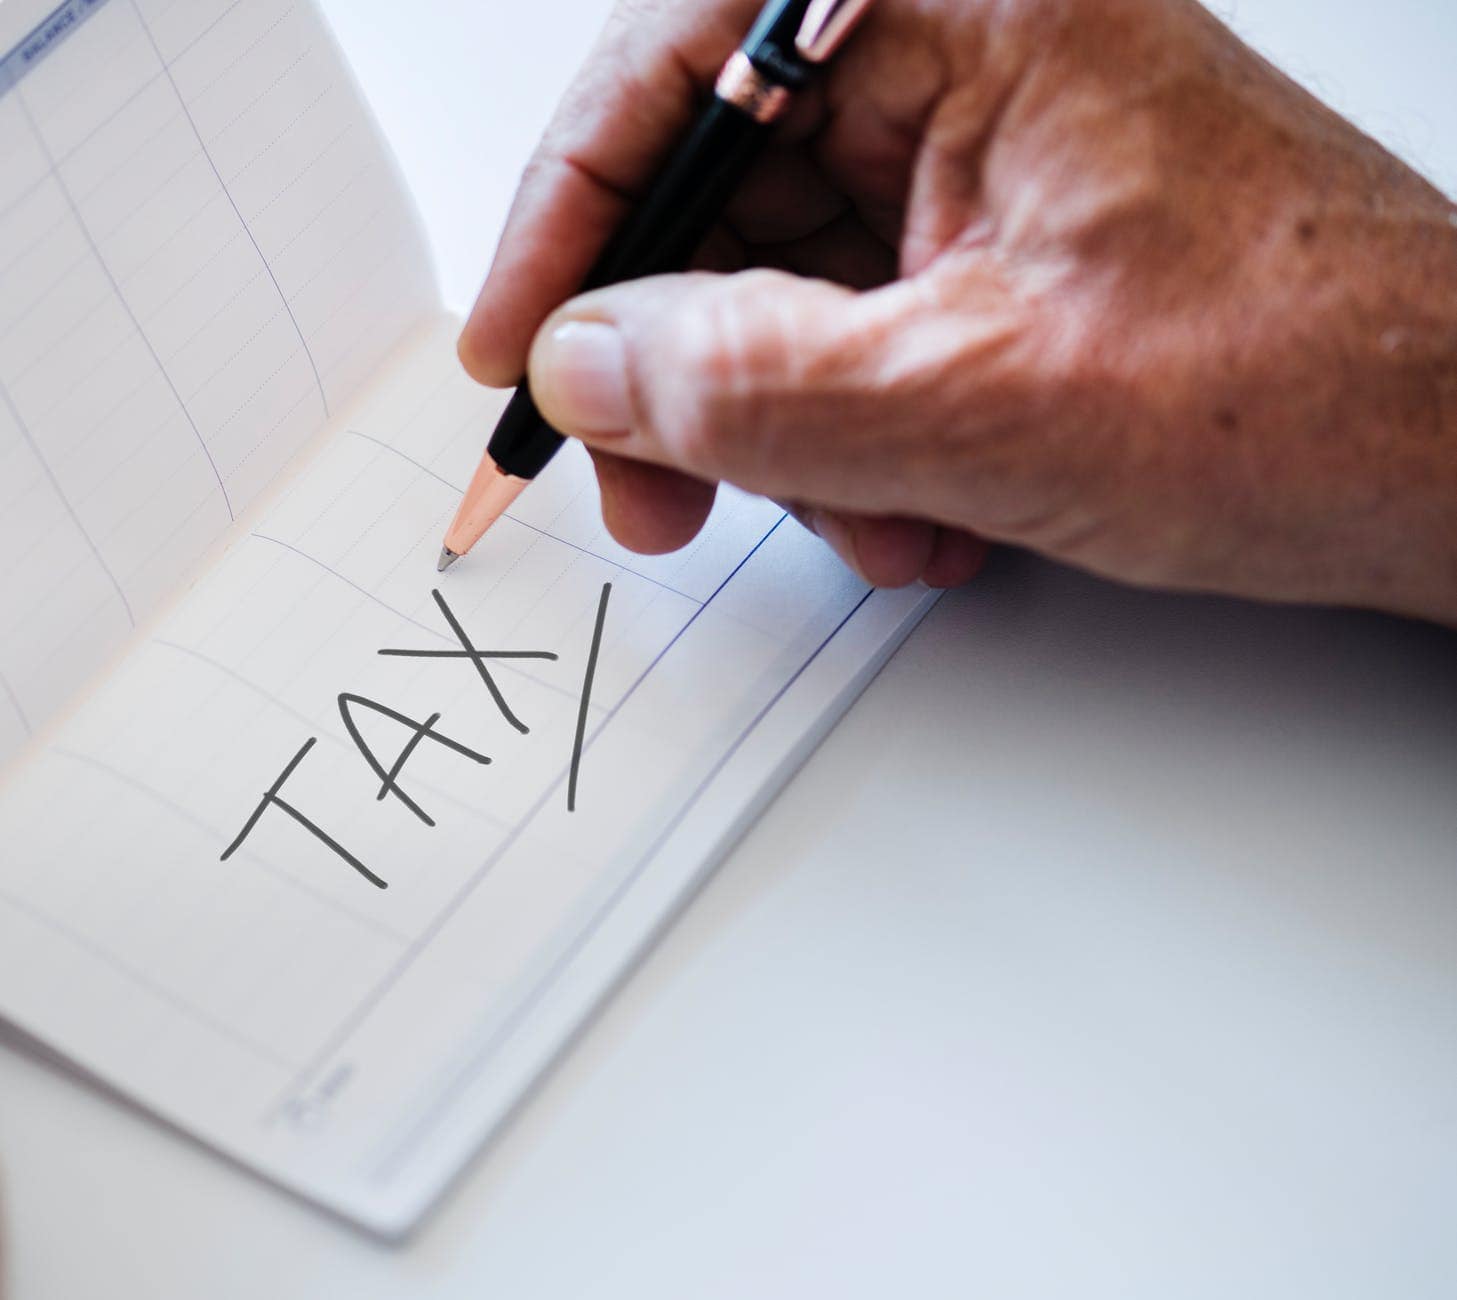 benefits of hire a tax attorney in Ohio